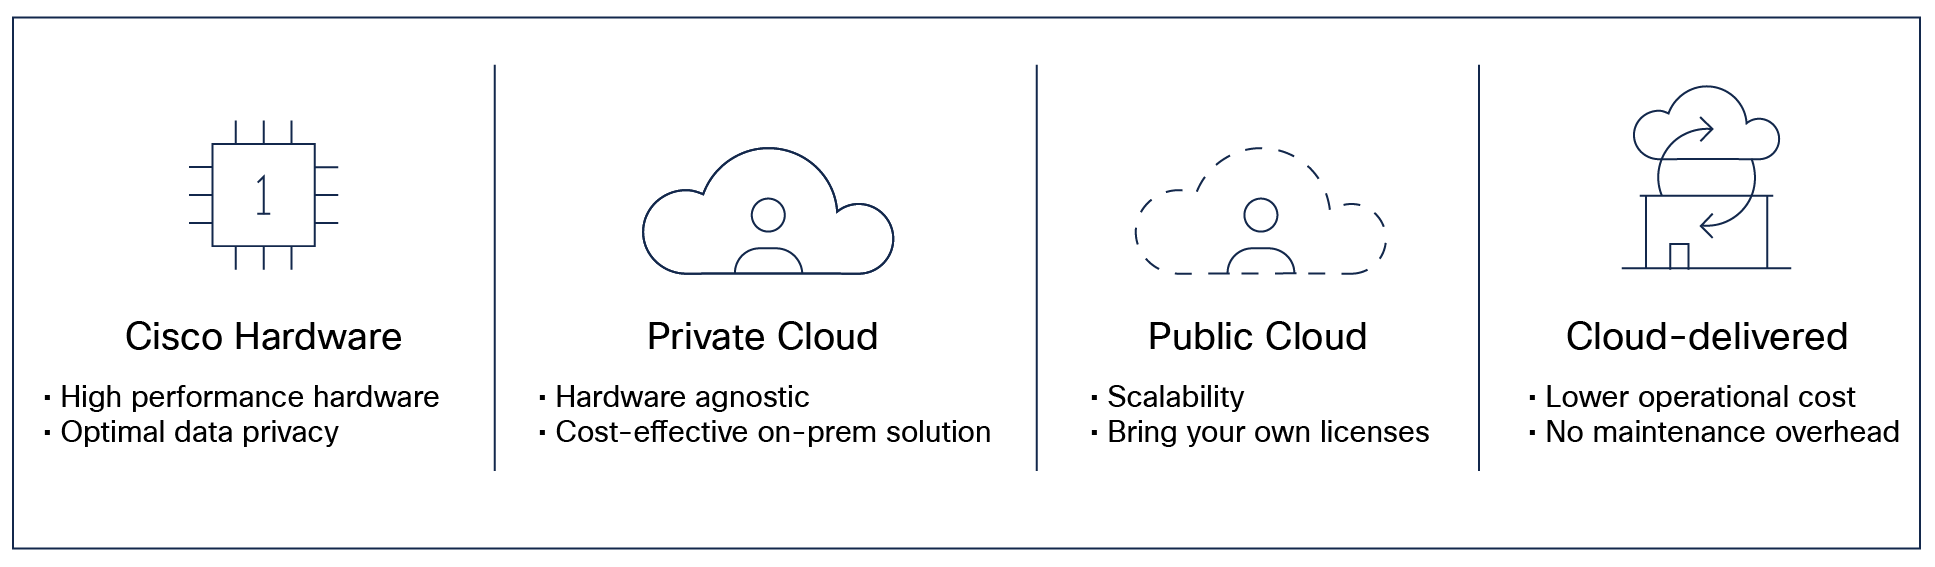 Versatile firewall management supports all form factors to offer unique value for your use case